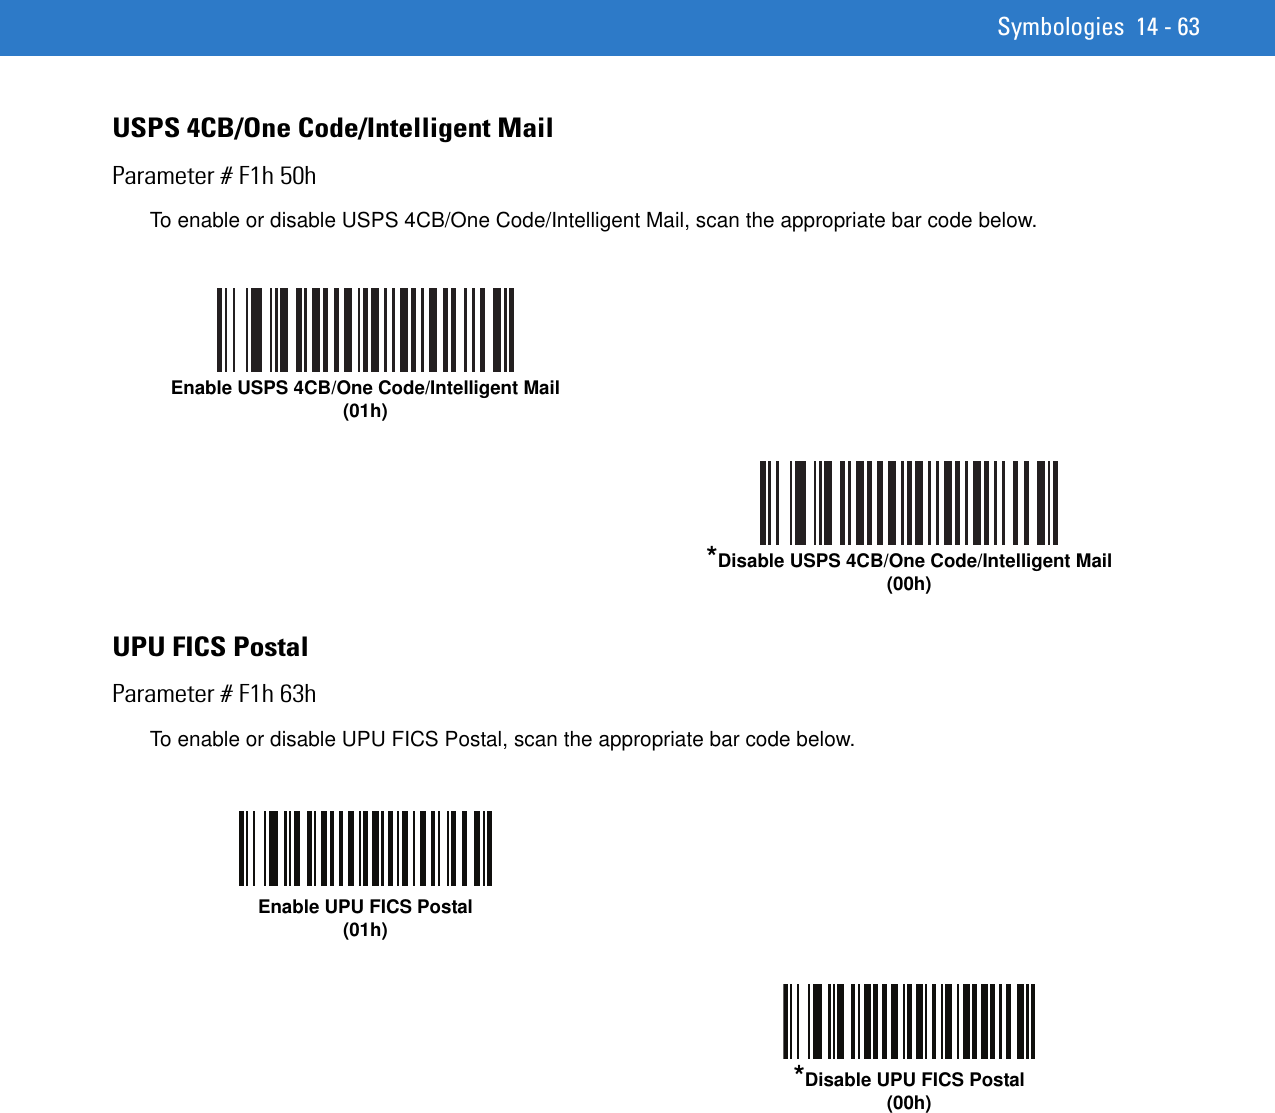 Symbologies 14 - 63USPS 4CB/One Code/Intelligent MailParameter # F1h 50hTo enable or disable USPS 4CB/One Code/Intelligent Mail, scan the appropriate bar code below. UPU FICS PostalParameter # F1h 63hTo enable or disable UPU FICS Postal, scan the appropriate bar code below. Enable USPS 4CB/One Code/Intelligent Mail (01h)*Disable USPS 4CB/One Code/Intelligent Mail (00h)Enable UPU FICS Postal(01h)*Disable UPU FICS Postal(00h)